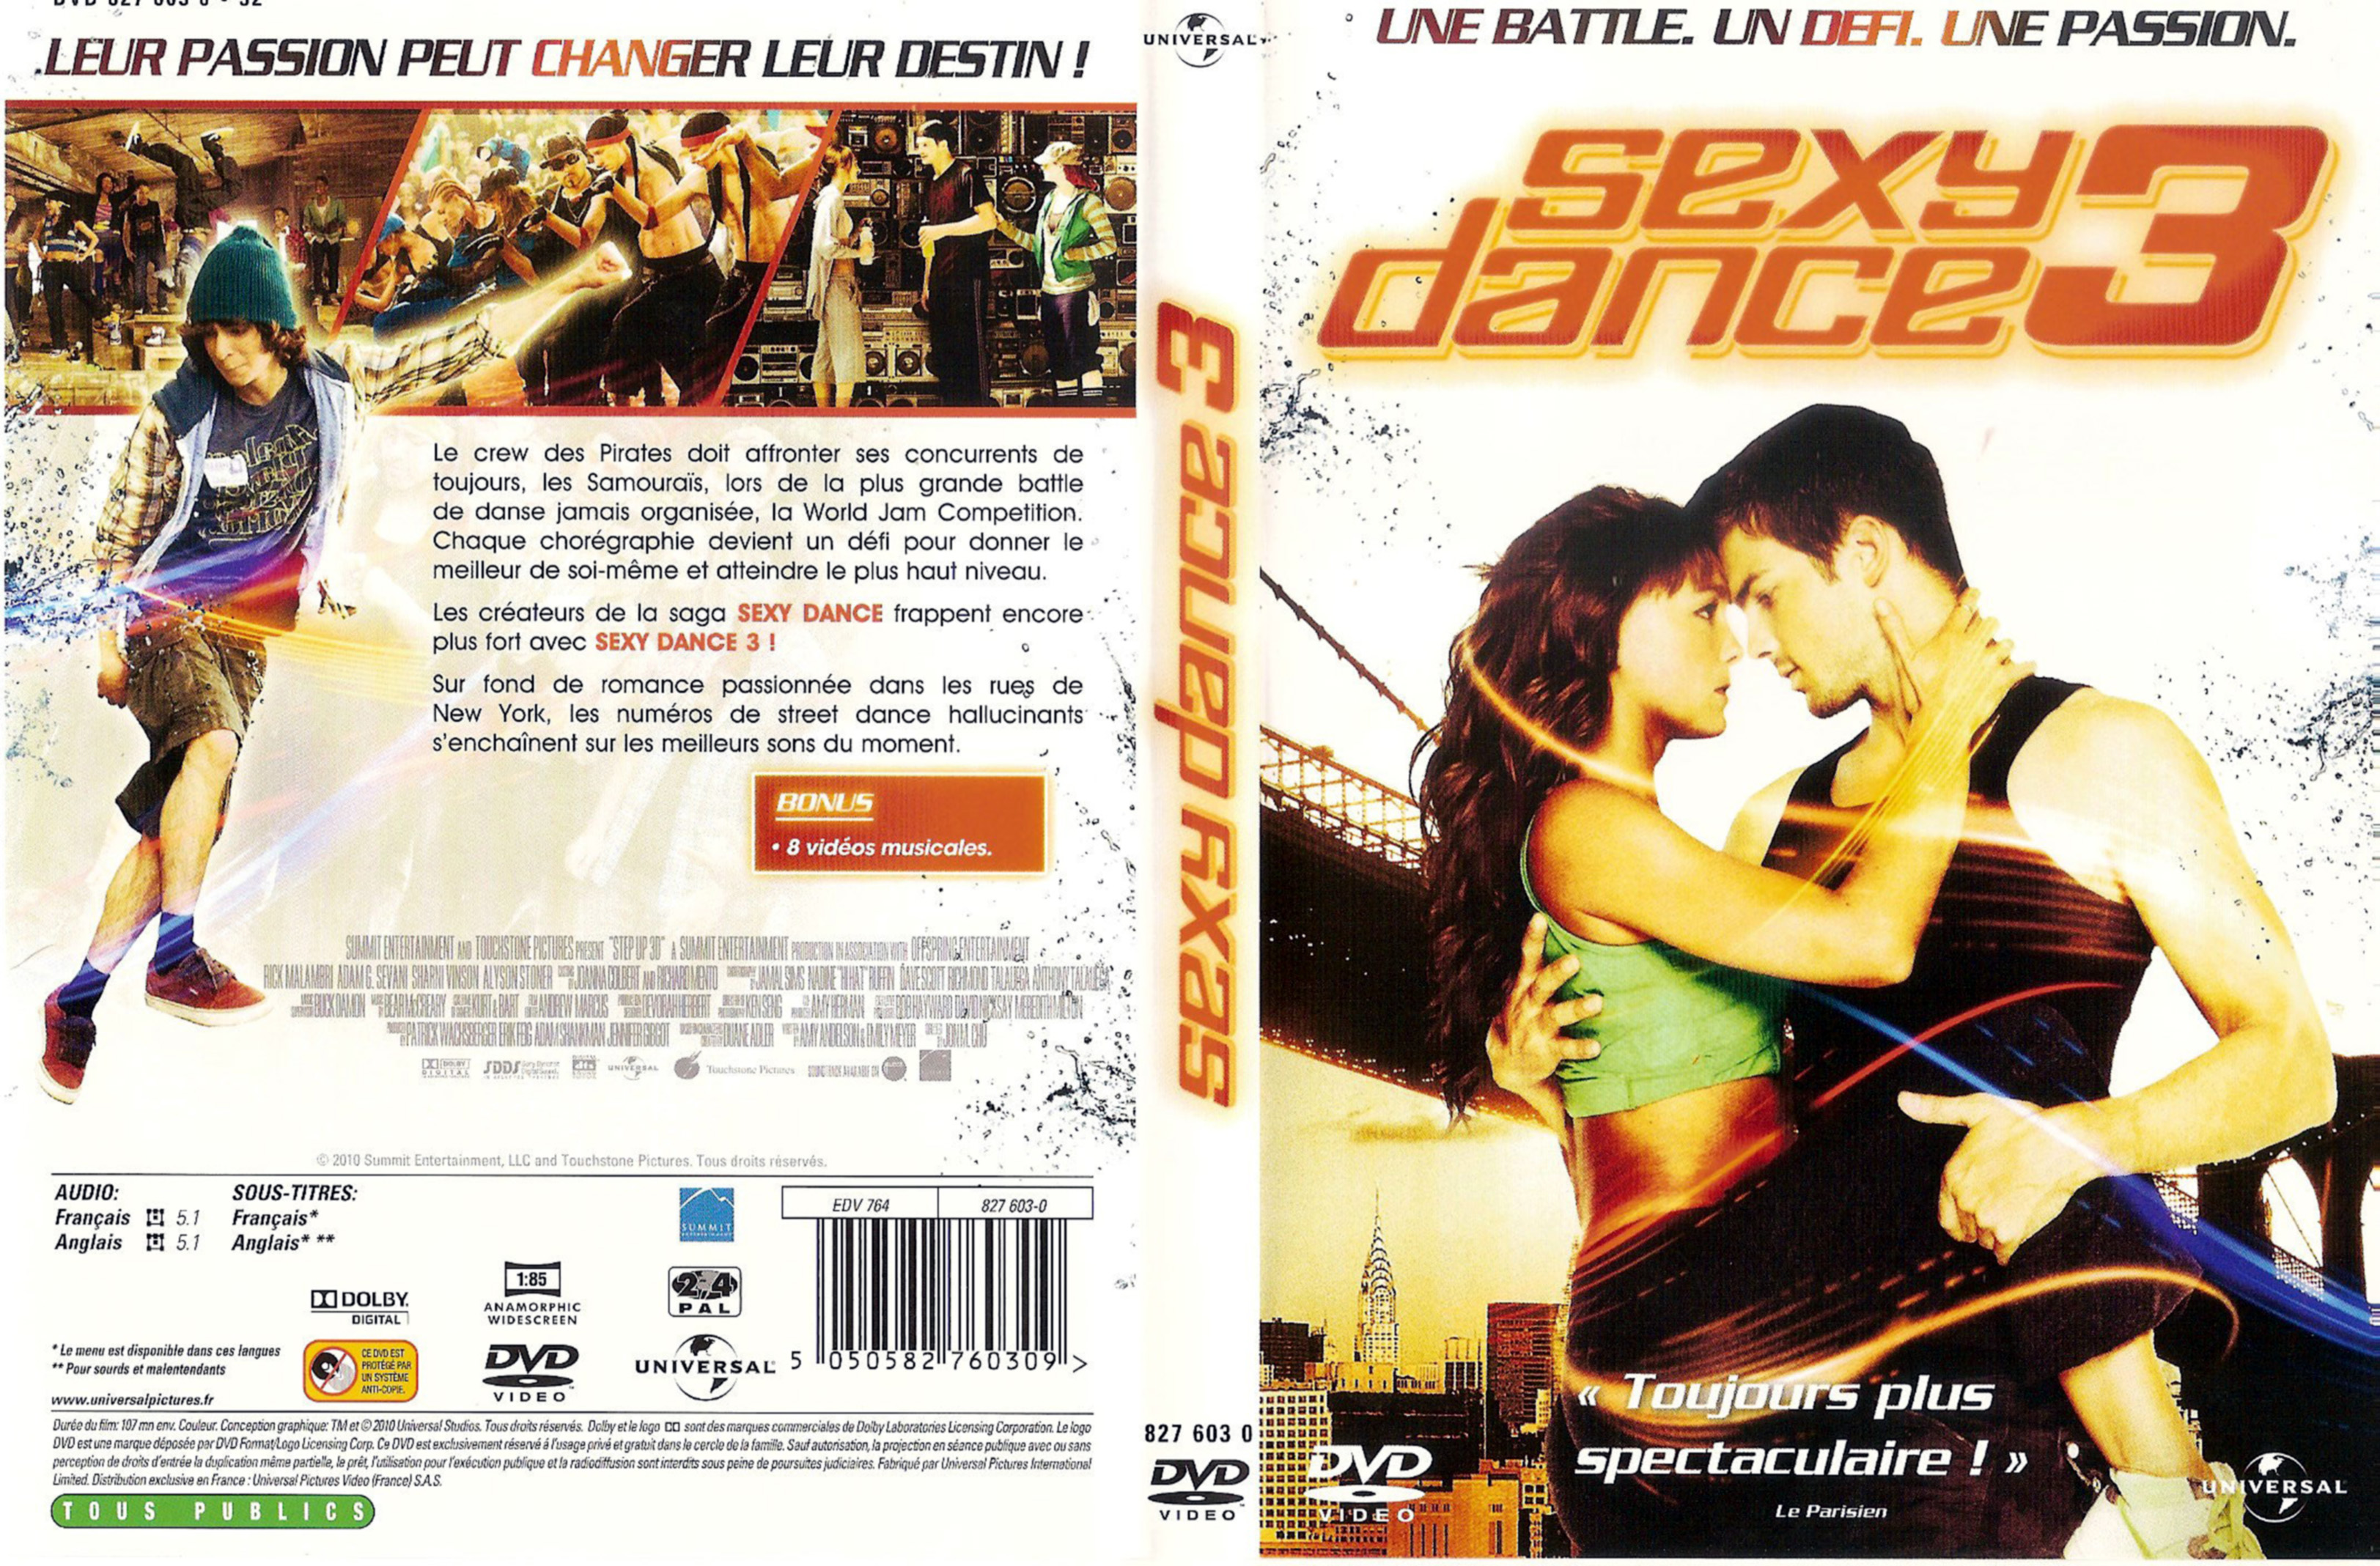 Jaquette DVD Sexy dance 3